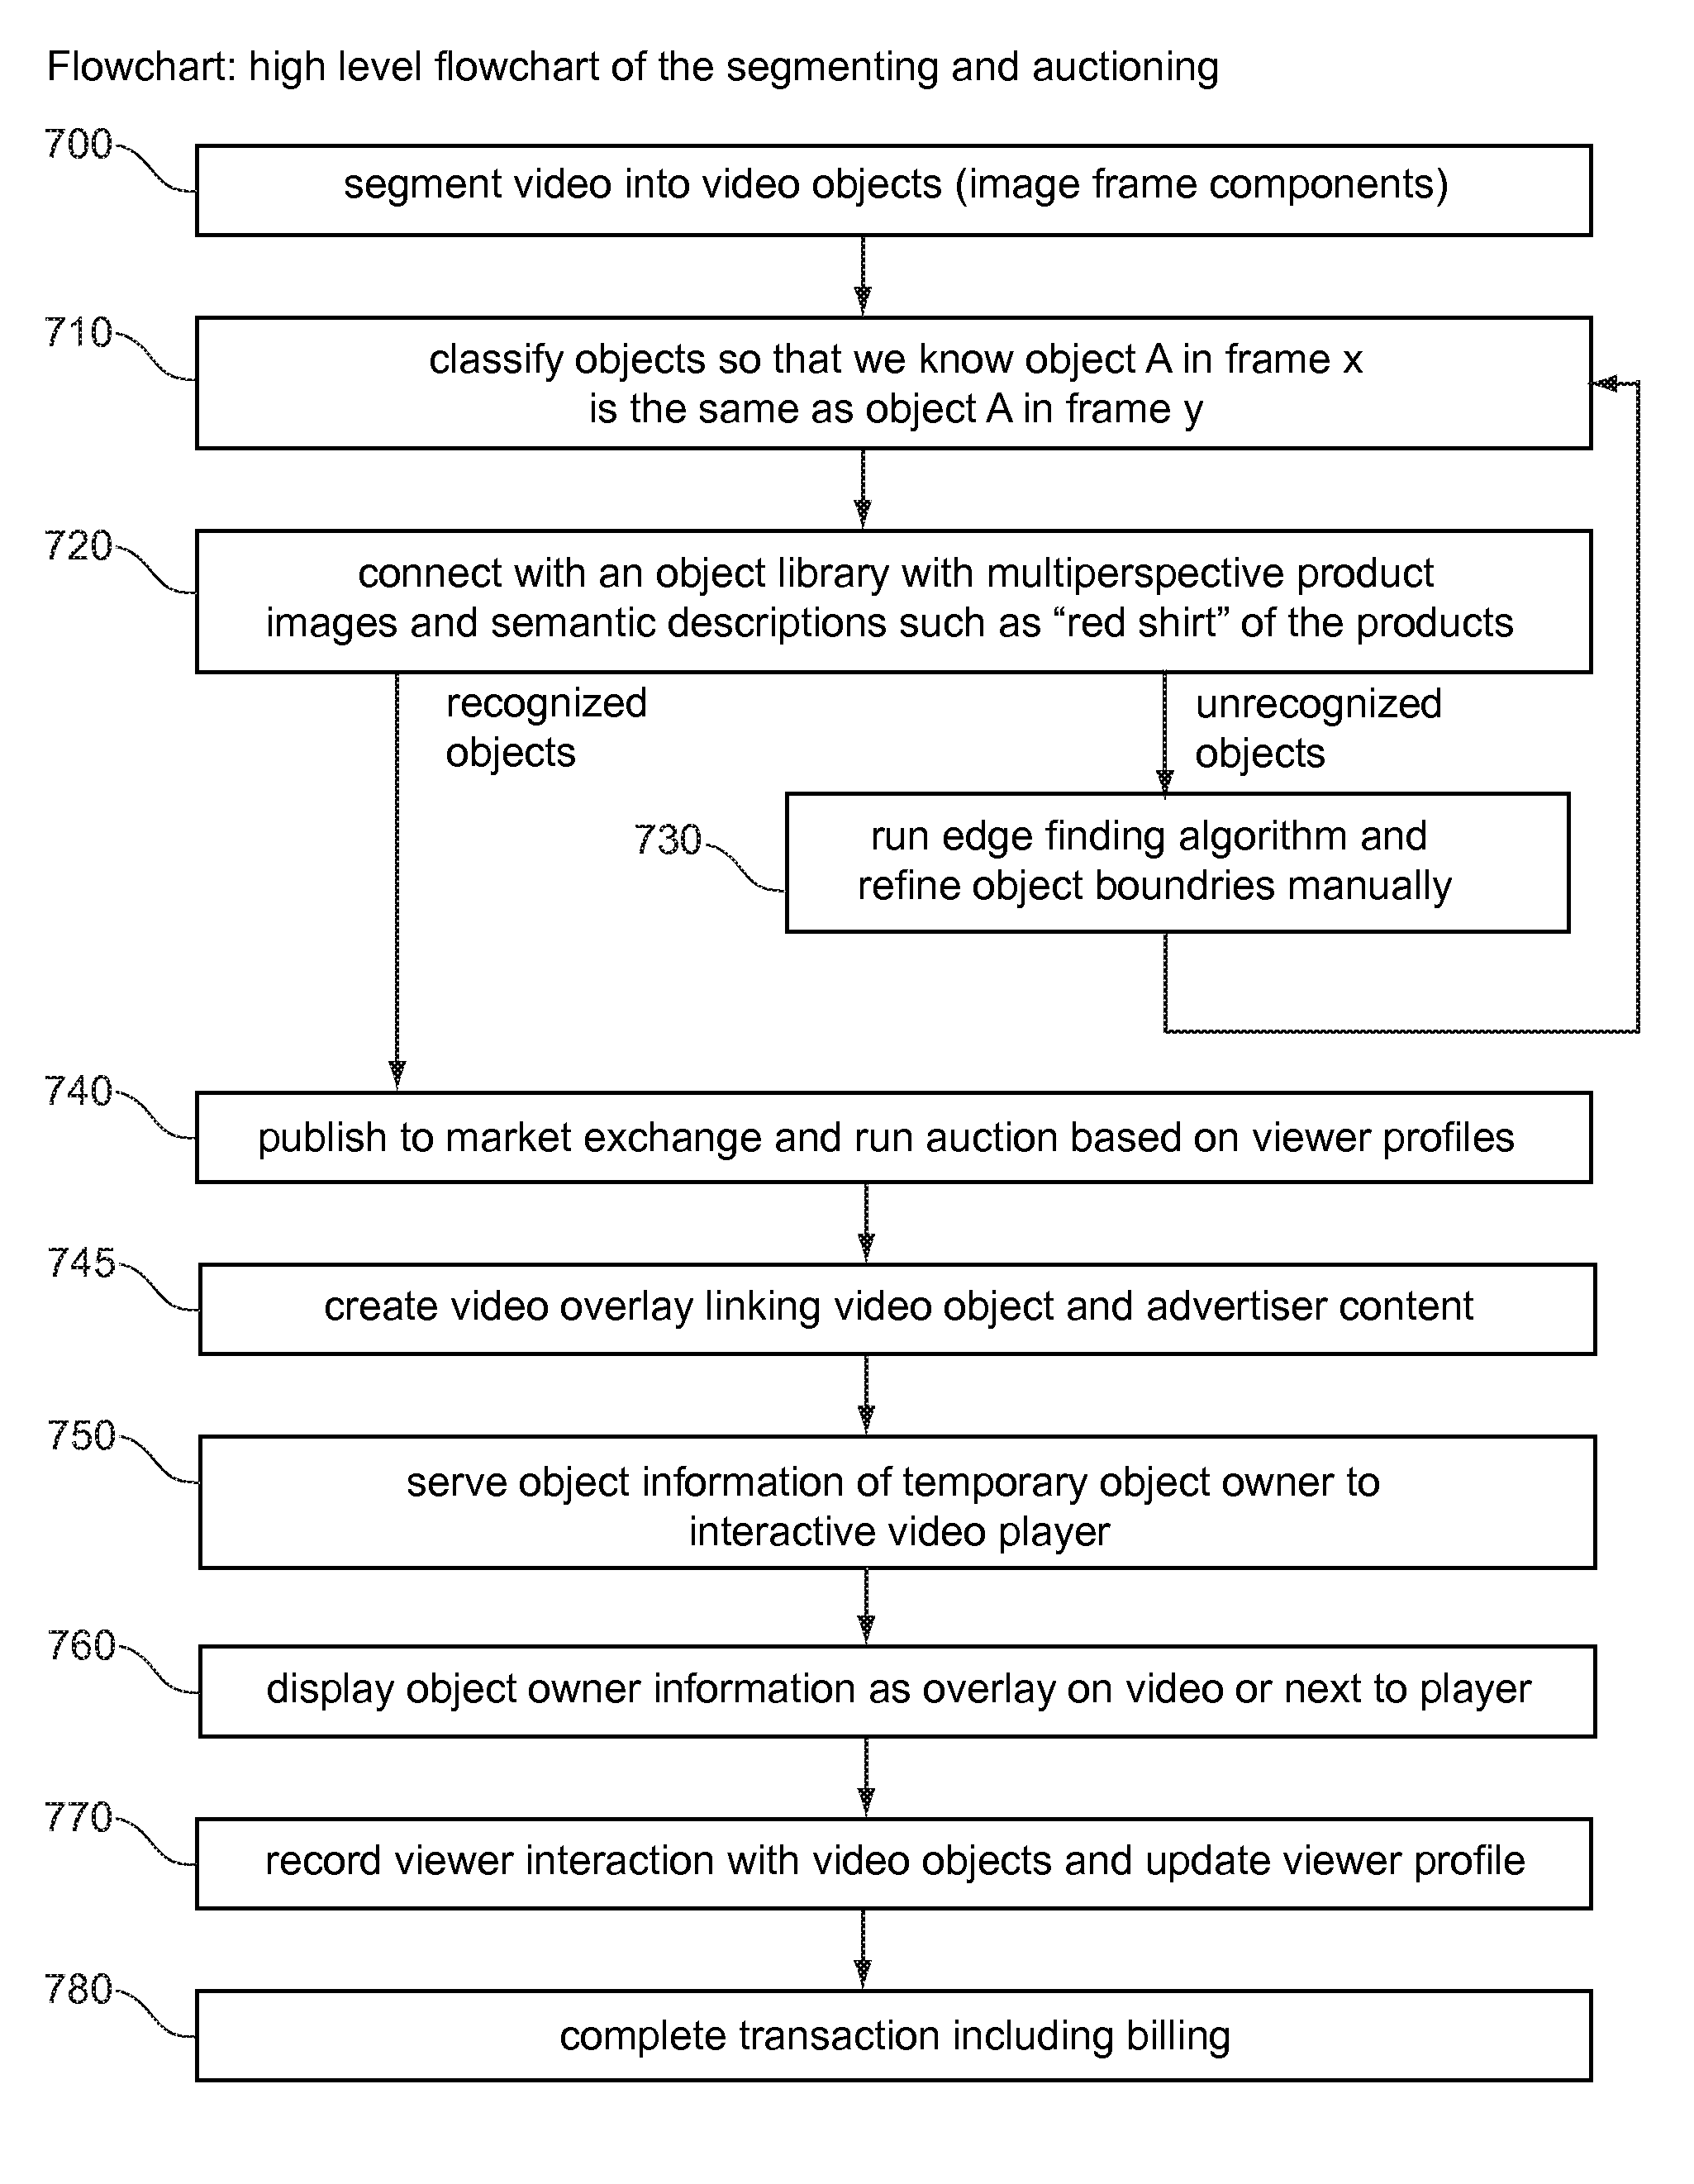 Automated process for segmenting and classifying video objects and auctioning rights to interactive sharable video objects